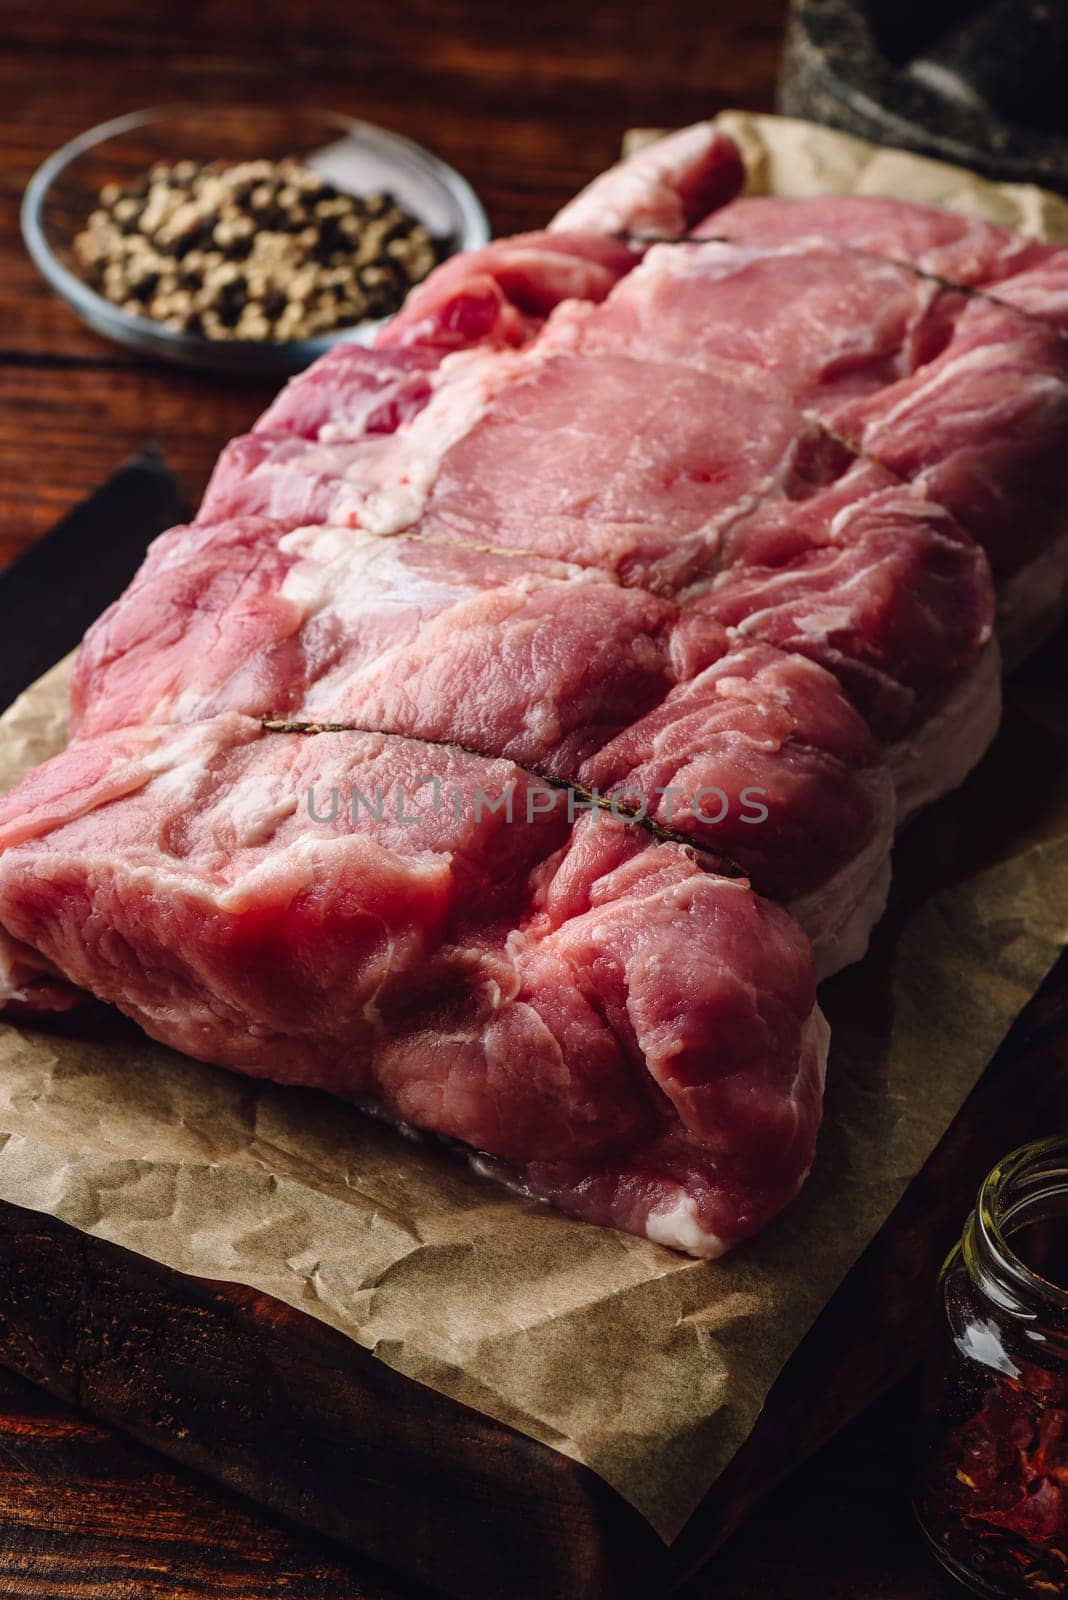 Raw pork loin joint on cutting board with different spices